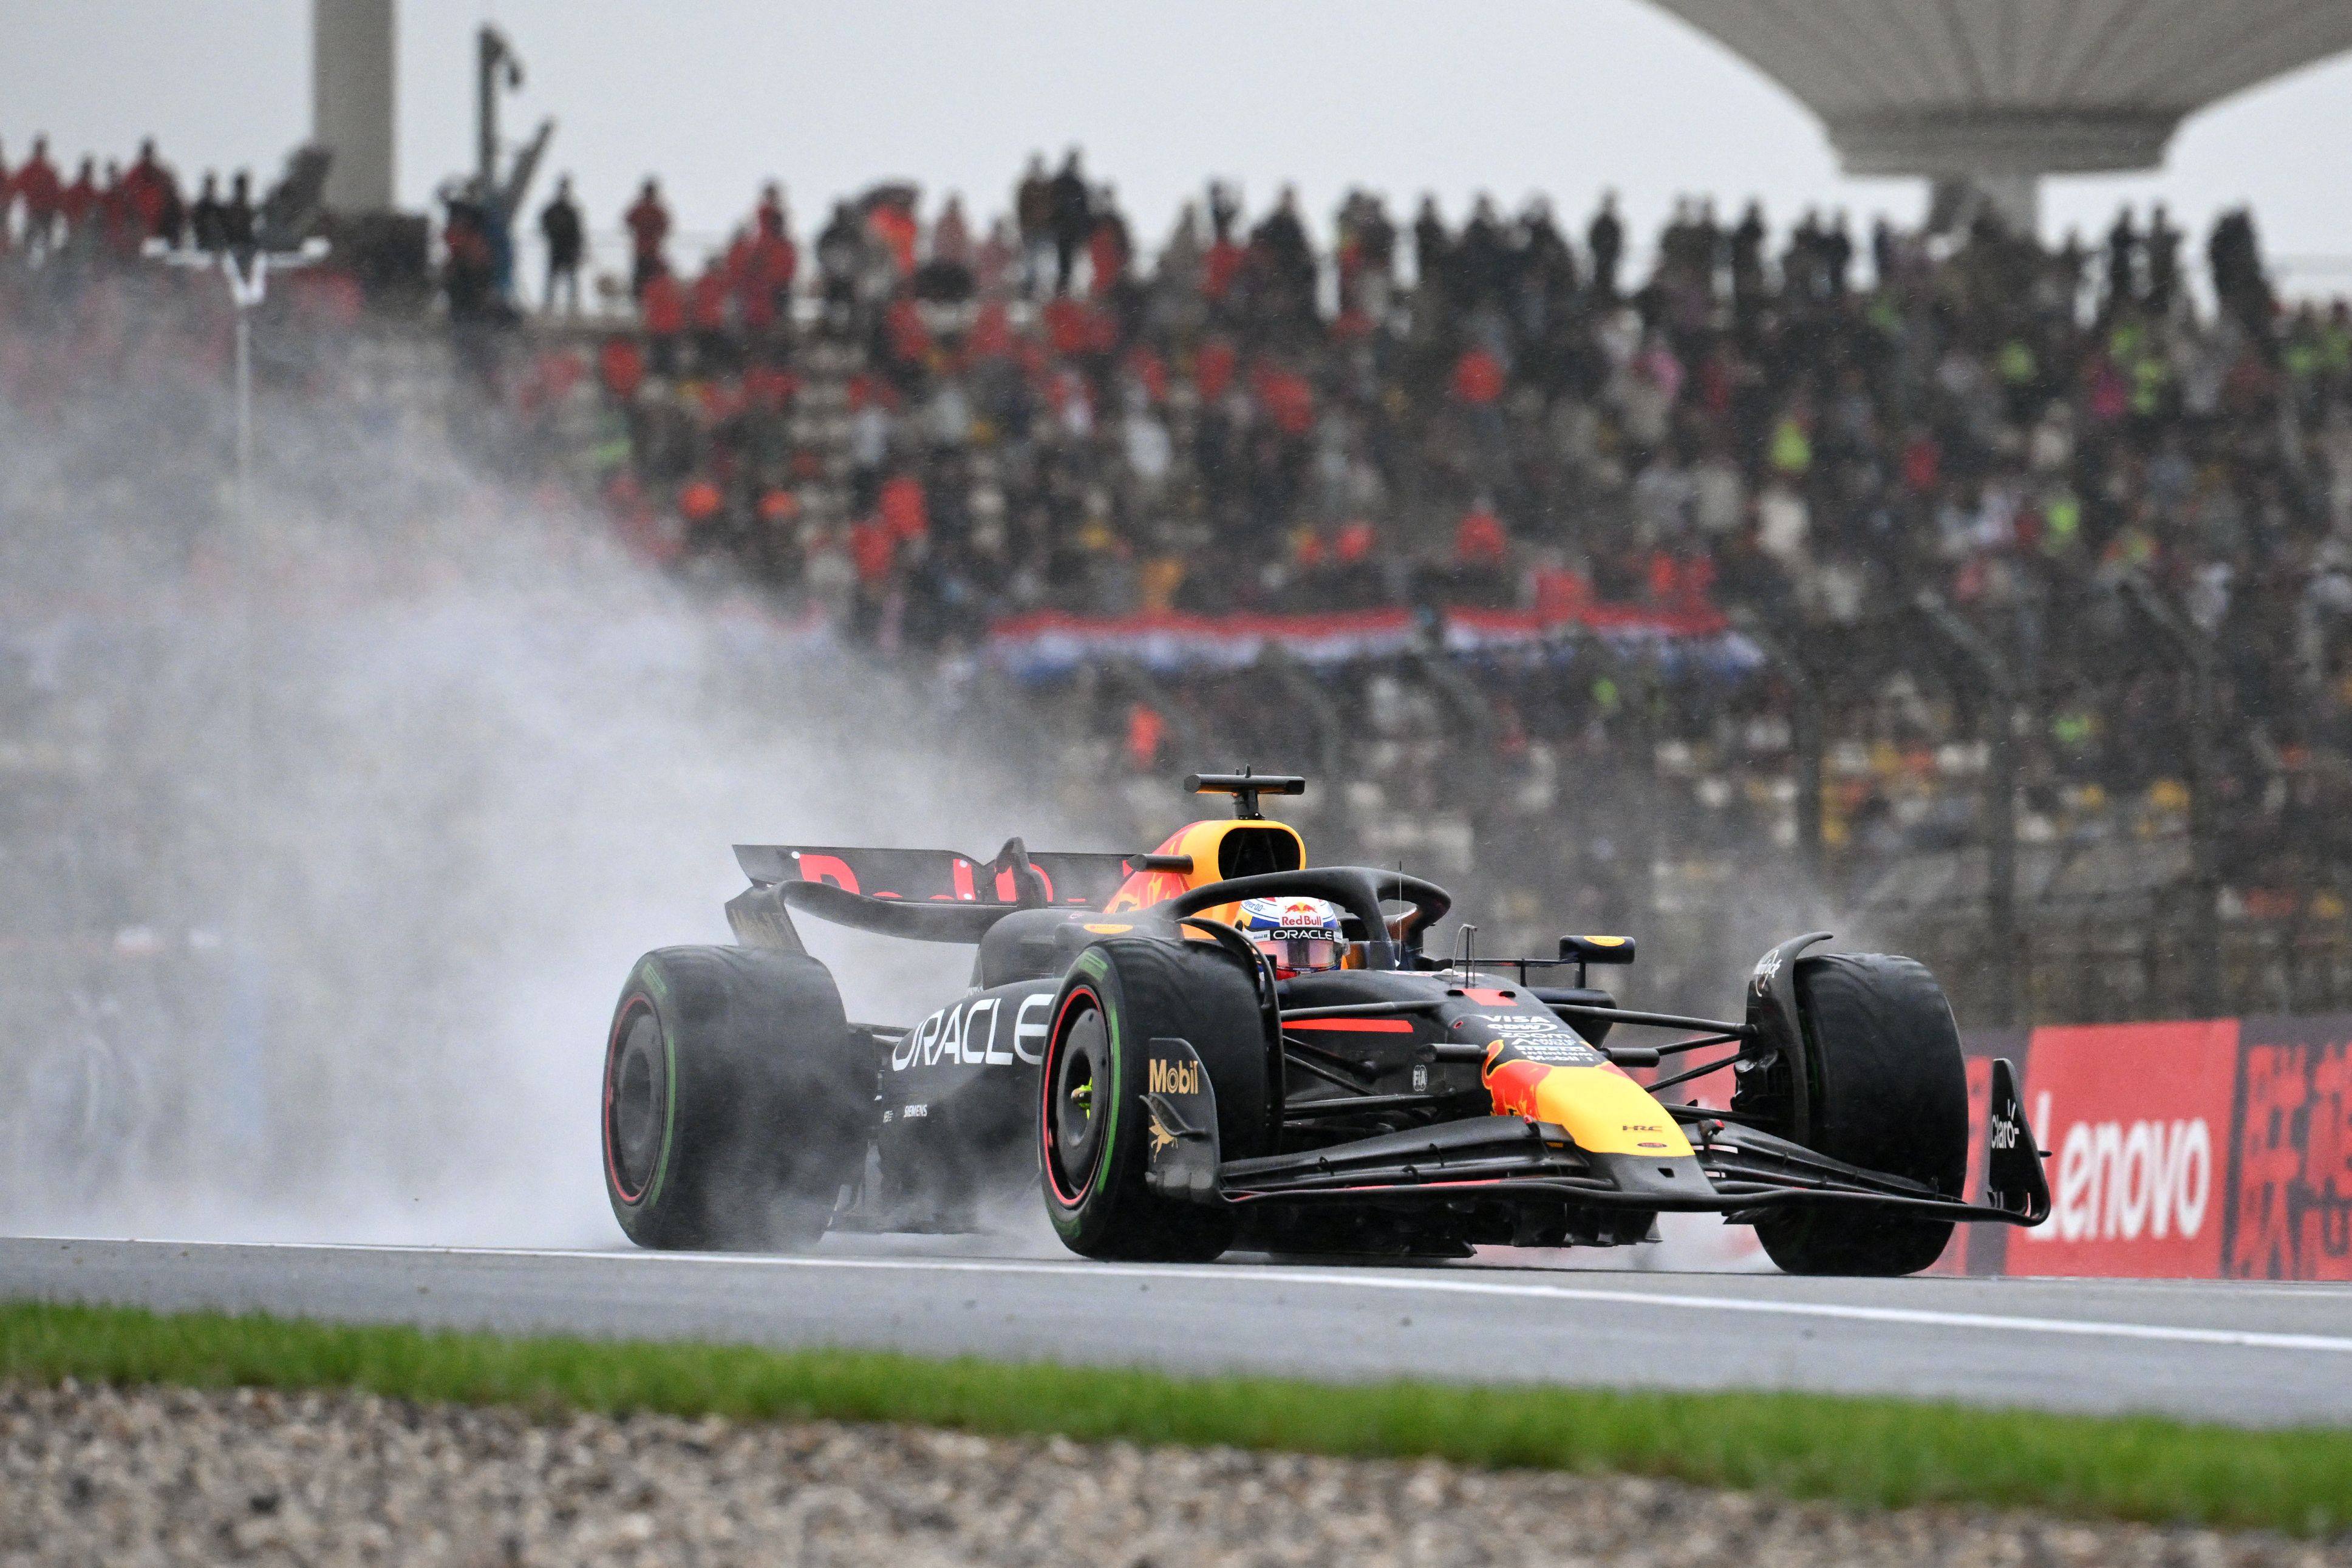 Red Bull Racing’s Max Verstappen drives during a wet sprint qualifying session ahead of the Chinese Grand Prix at the Shanghai International Circuit. Photo: AFP